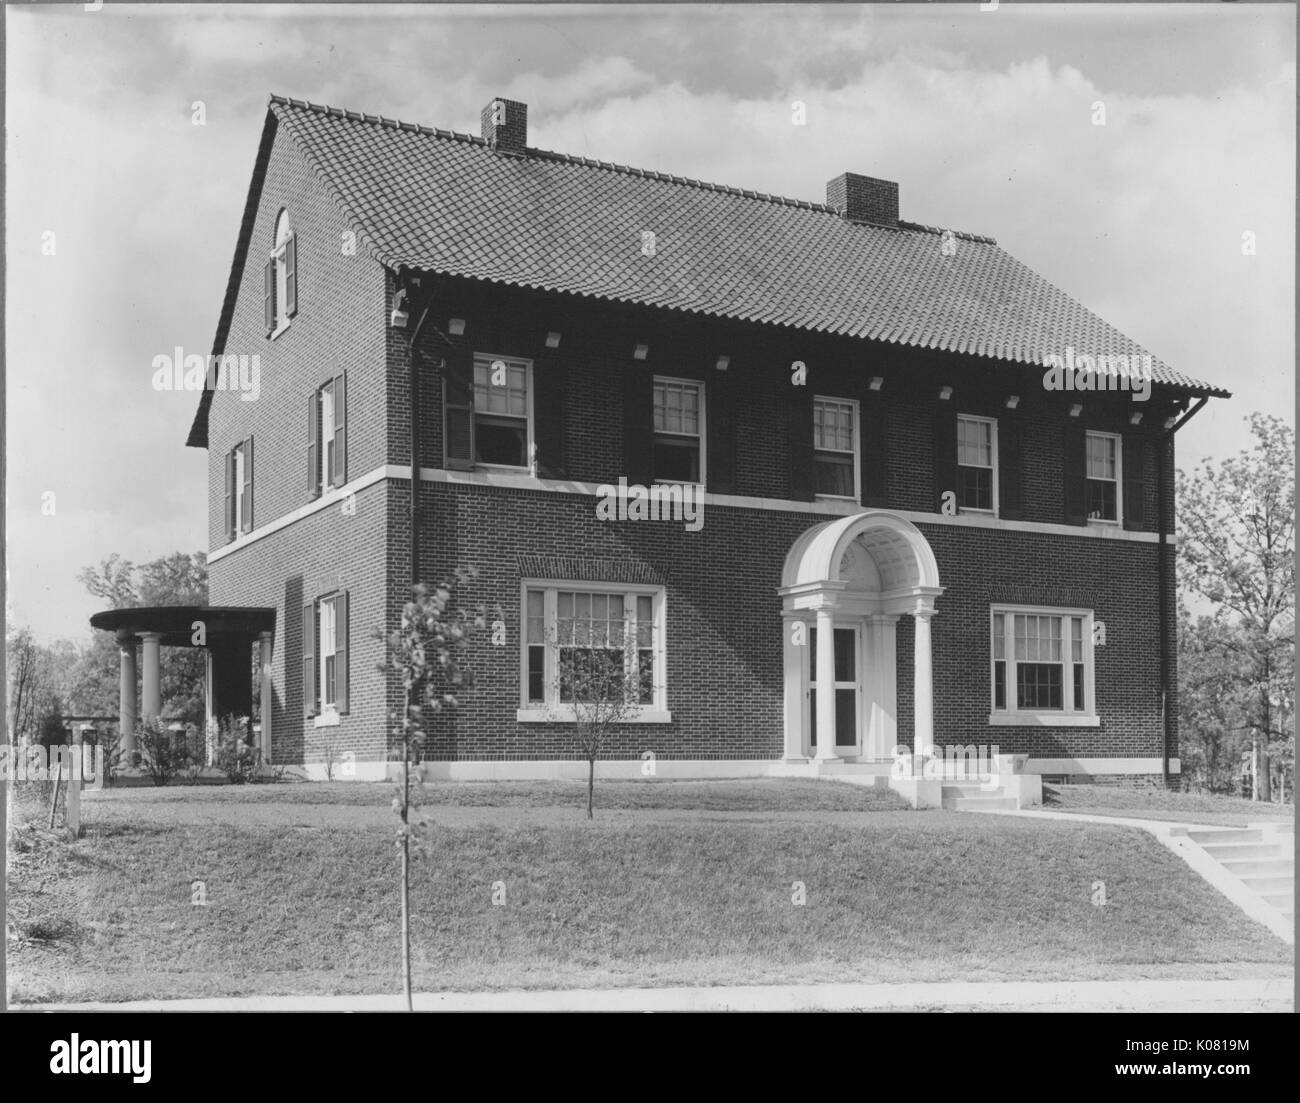 Photograph of the exterior of a brick home in Baltimore, Maryland featuring windows with and without shutters, chimneys, and two small sets of stairs leading to a covered entryway, situated in a sparsely landscapes lawn on a residential street with a sidewalk in Baltimore, Maryland, 1910. This image is from a series documenting the construction and sale of homes in the Roland Park/Guilford neighborhood of Baltimore, a streetcar suburb and one of the first planned communities in the United States. Stock Photo